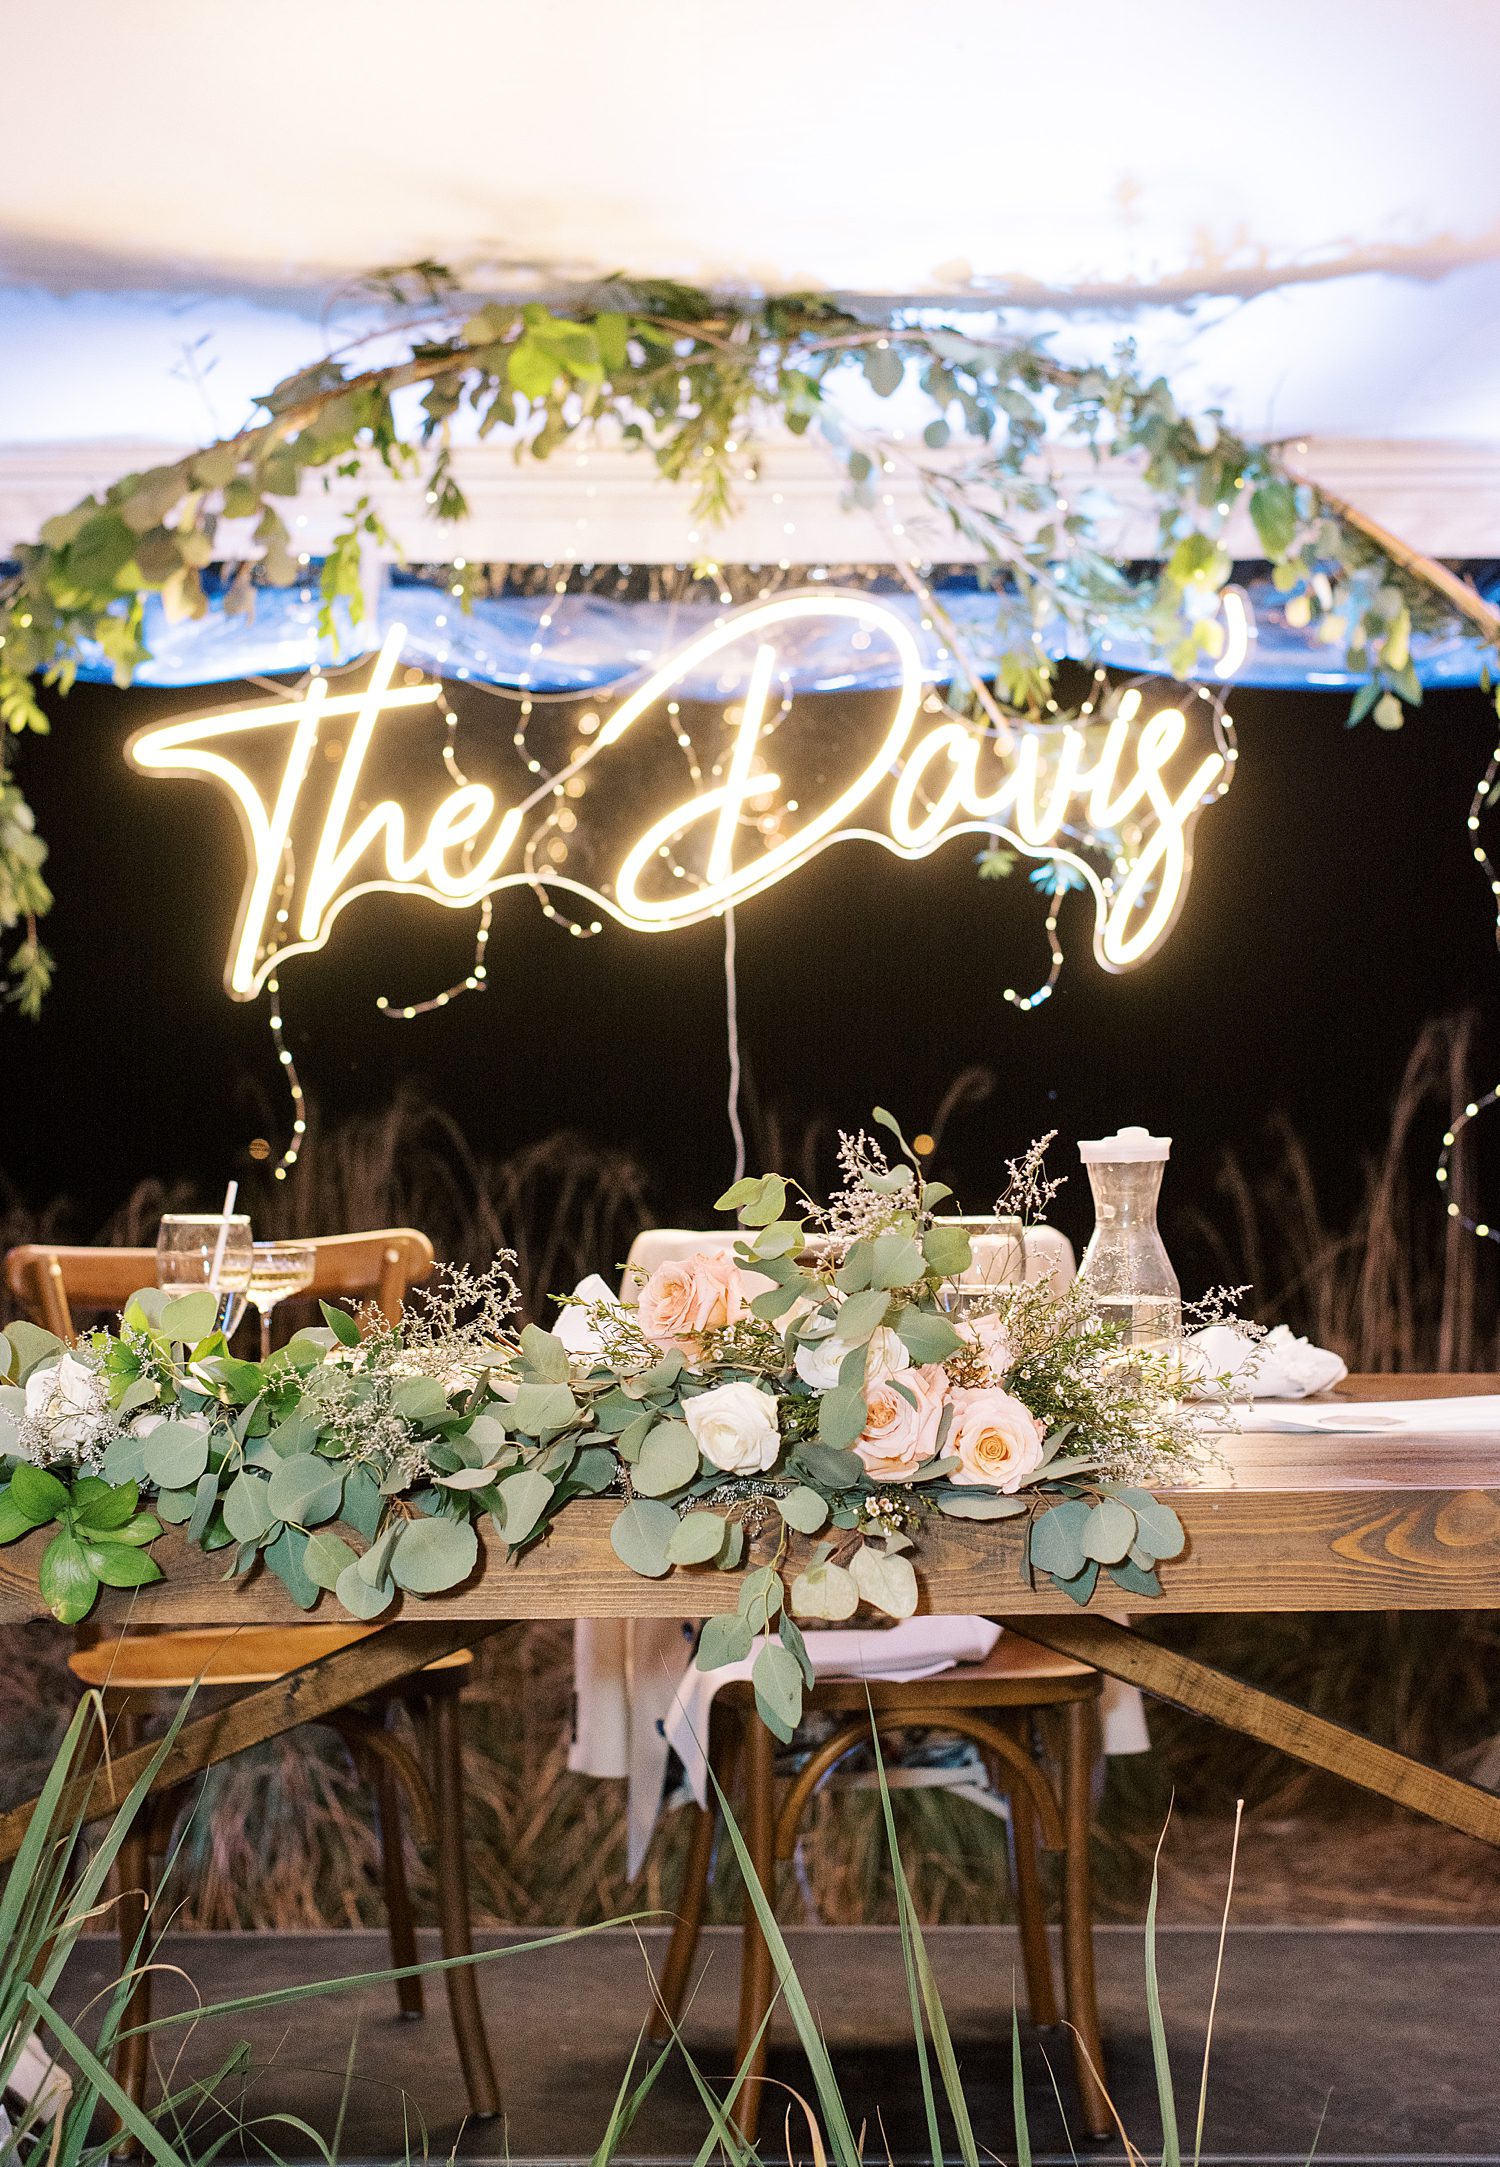 neon sign hangs from arbor during tented reception at Mill Pond Estate